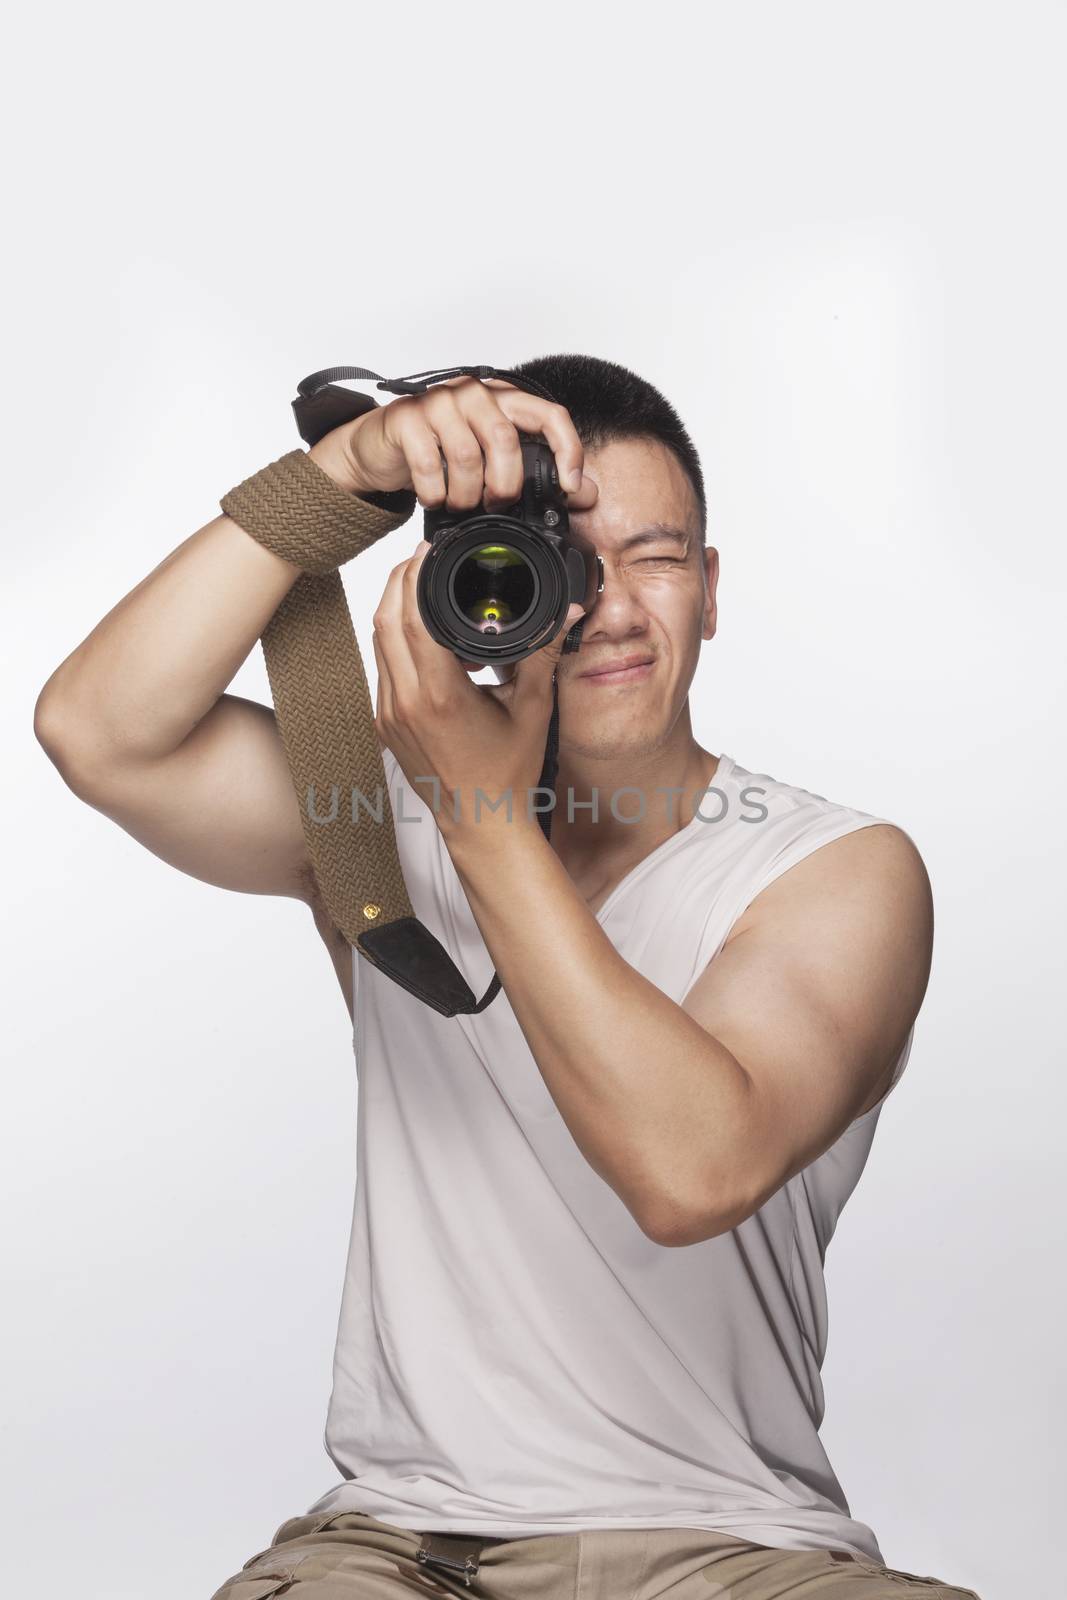 Man holding a camera and taking a photograph, studio shot